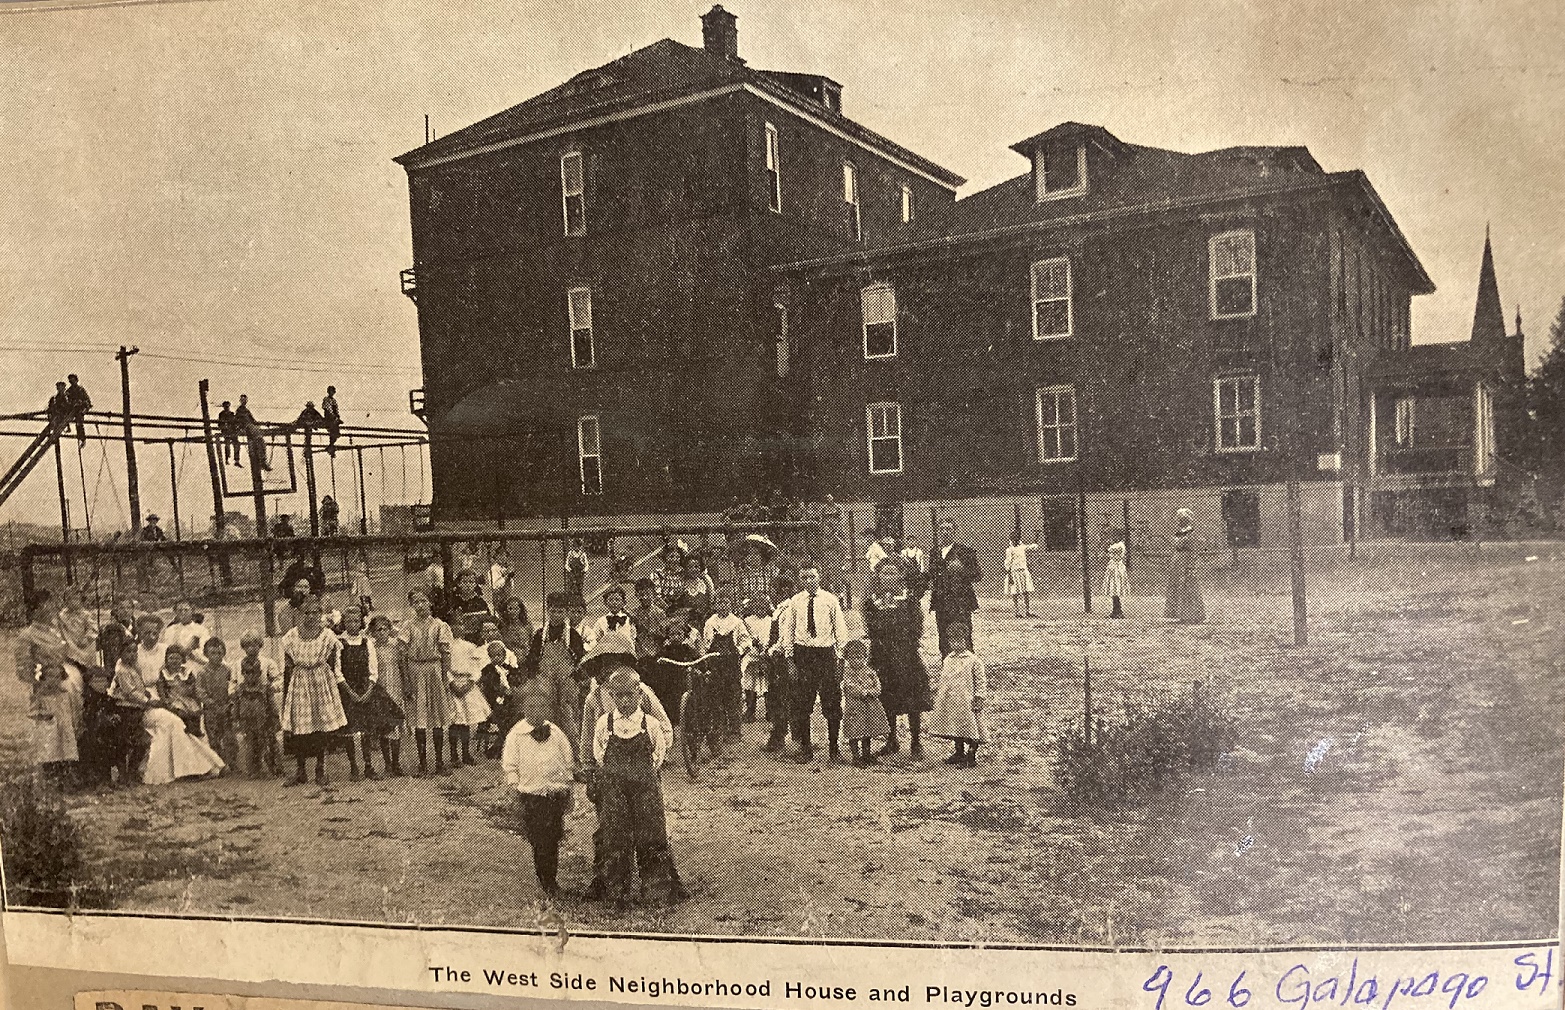 Newspaper clipping image with a large group of children and a few teachers standing in the foreground of a playground. Several children are sitting up high on climbing equipment in the background. Further in the background is a large building. Written on the bottom of the image is "The West Side Neighborhood House and Playgrounds. 966 Galapago Street."